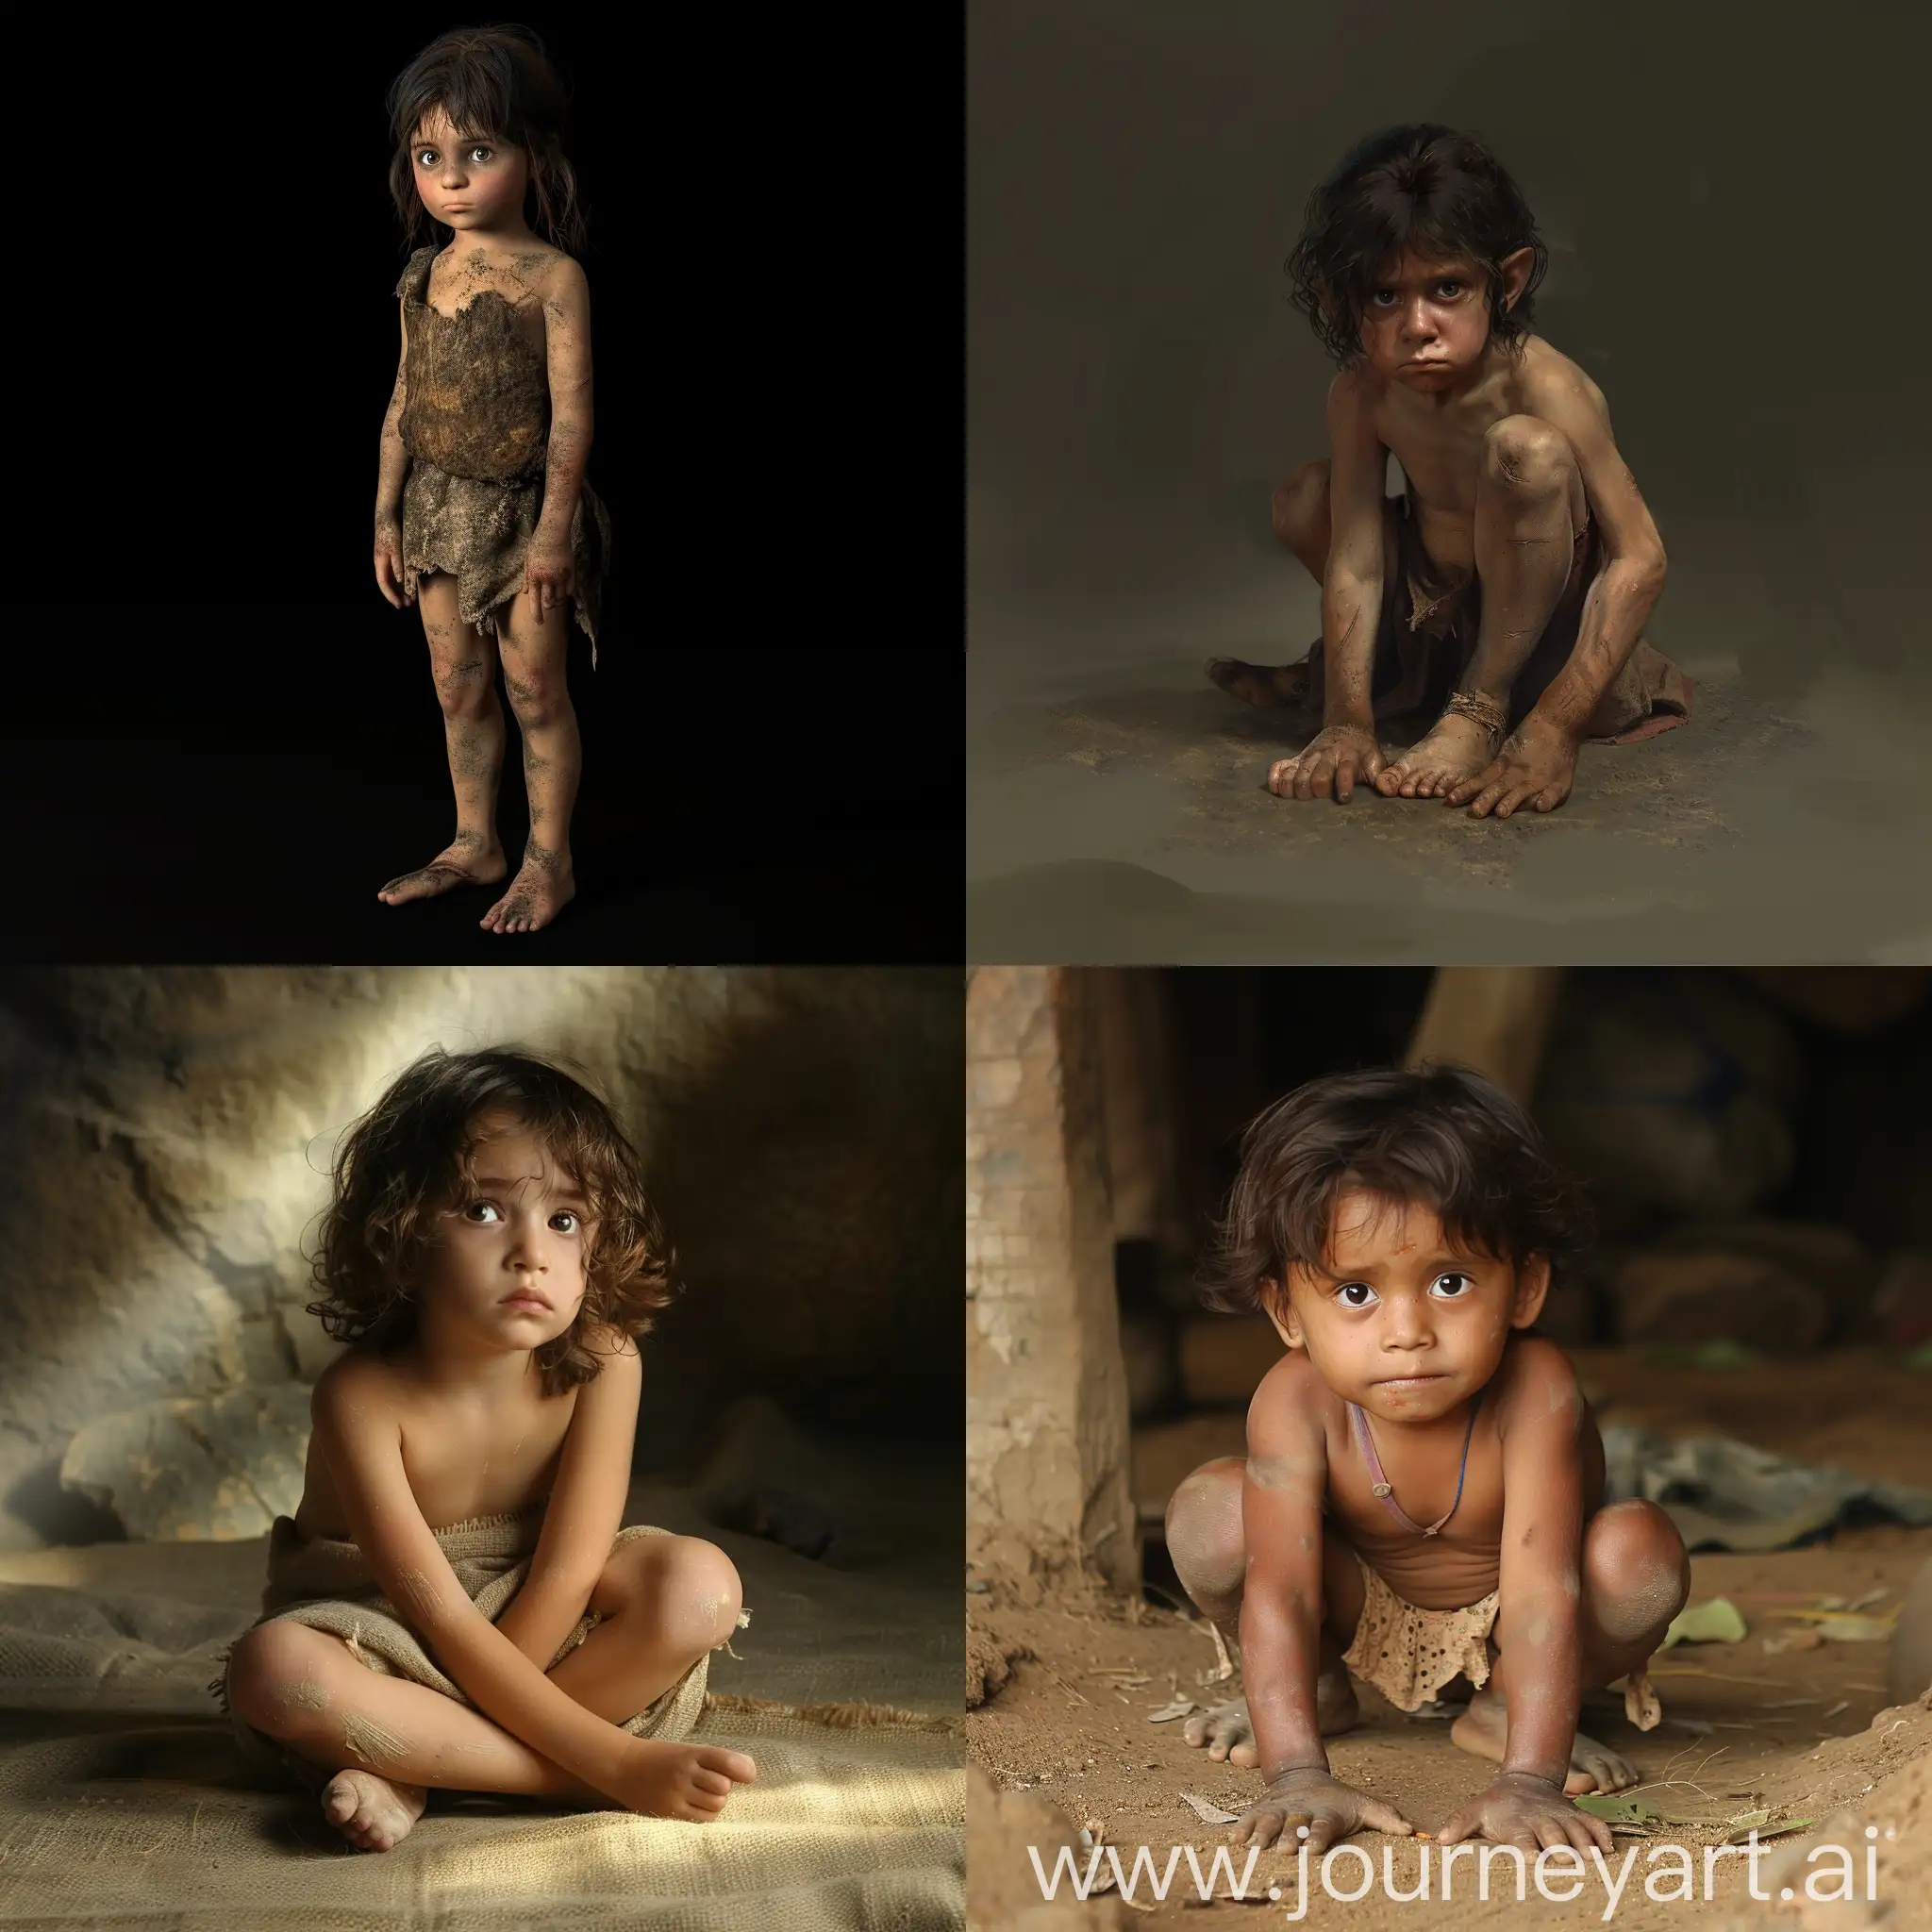 Generate an image of a child , she is a female and barefoot, she needs to be in the stone age